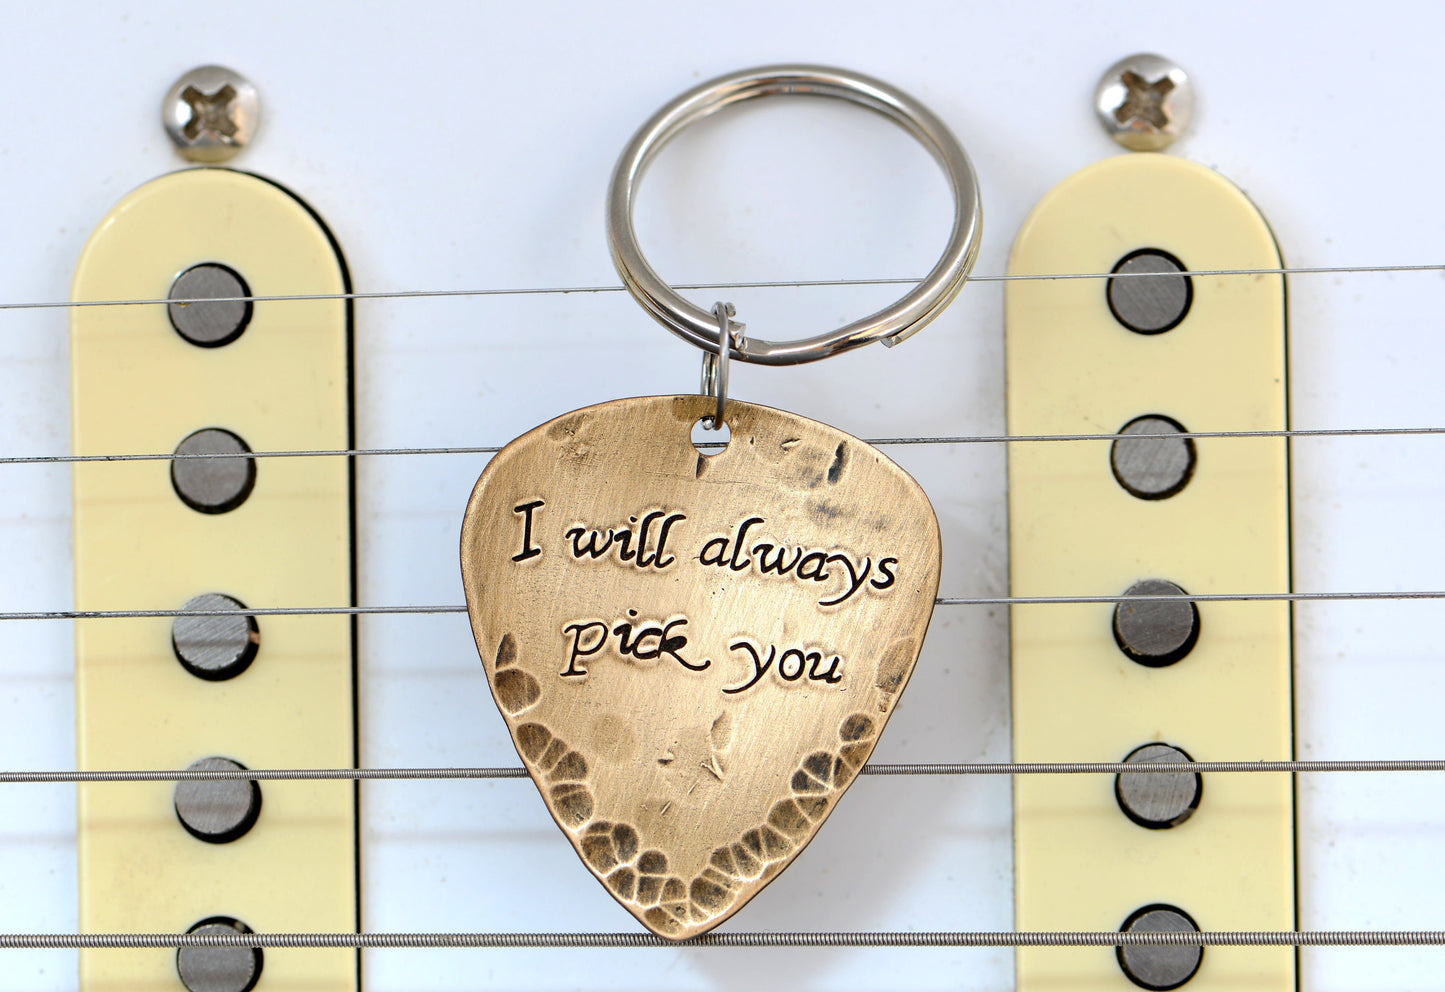 I will always pick you guitar pick with rustic patina on bronze